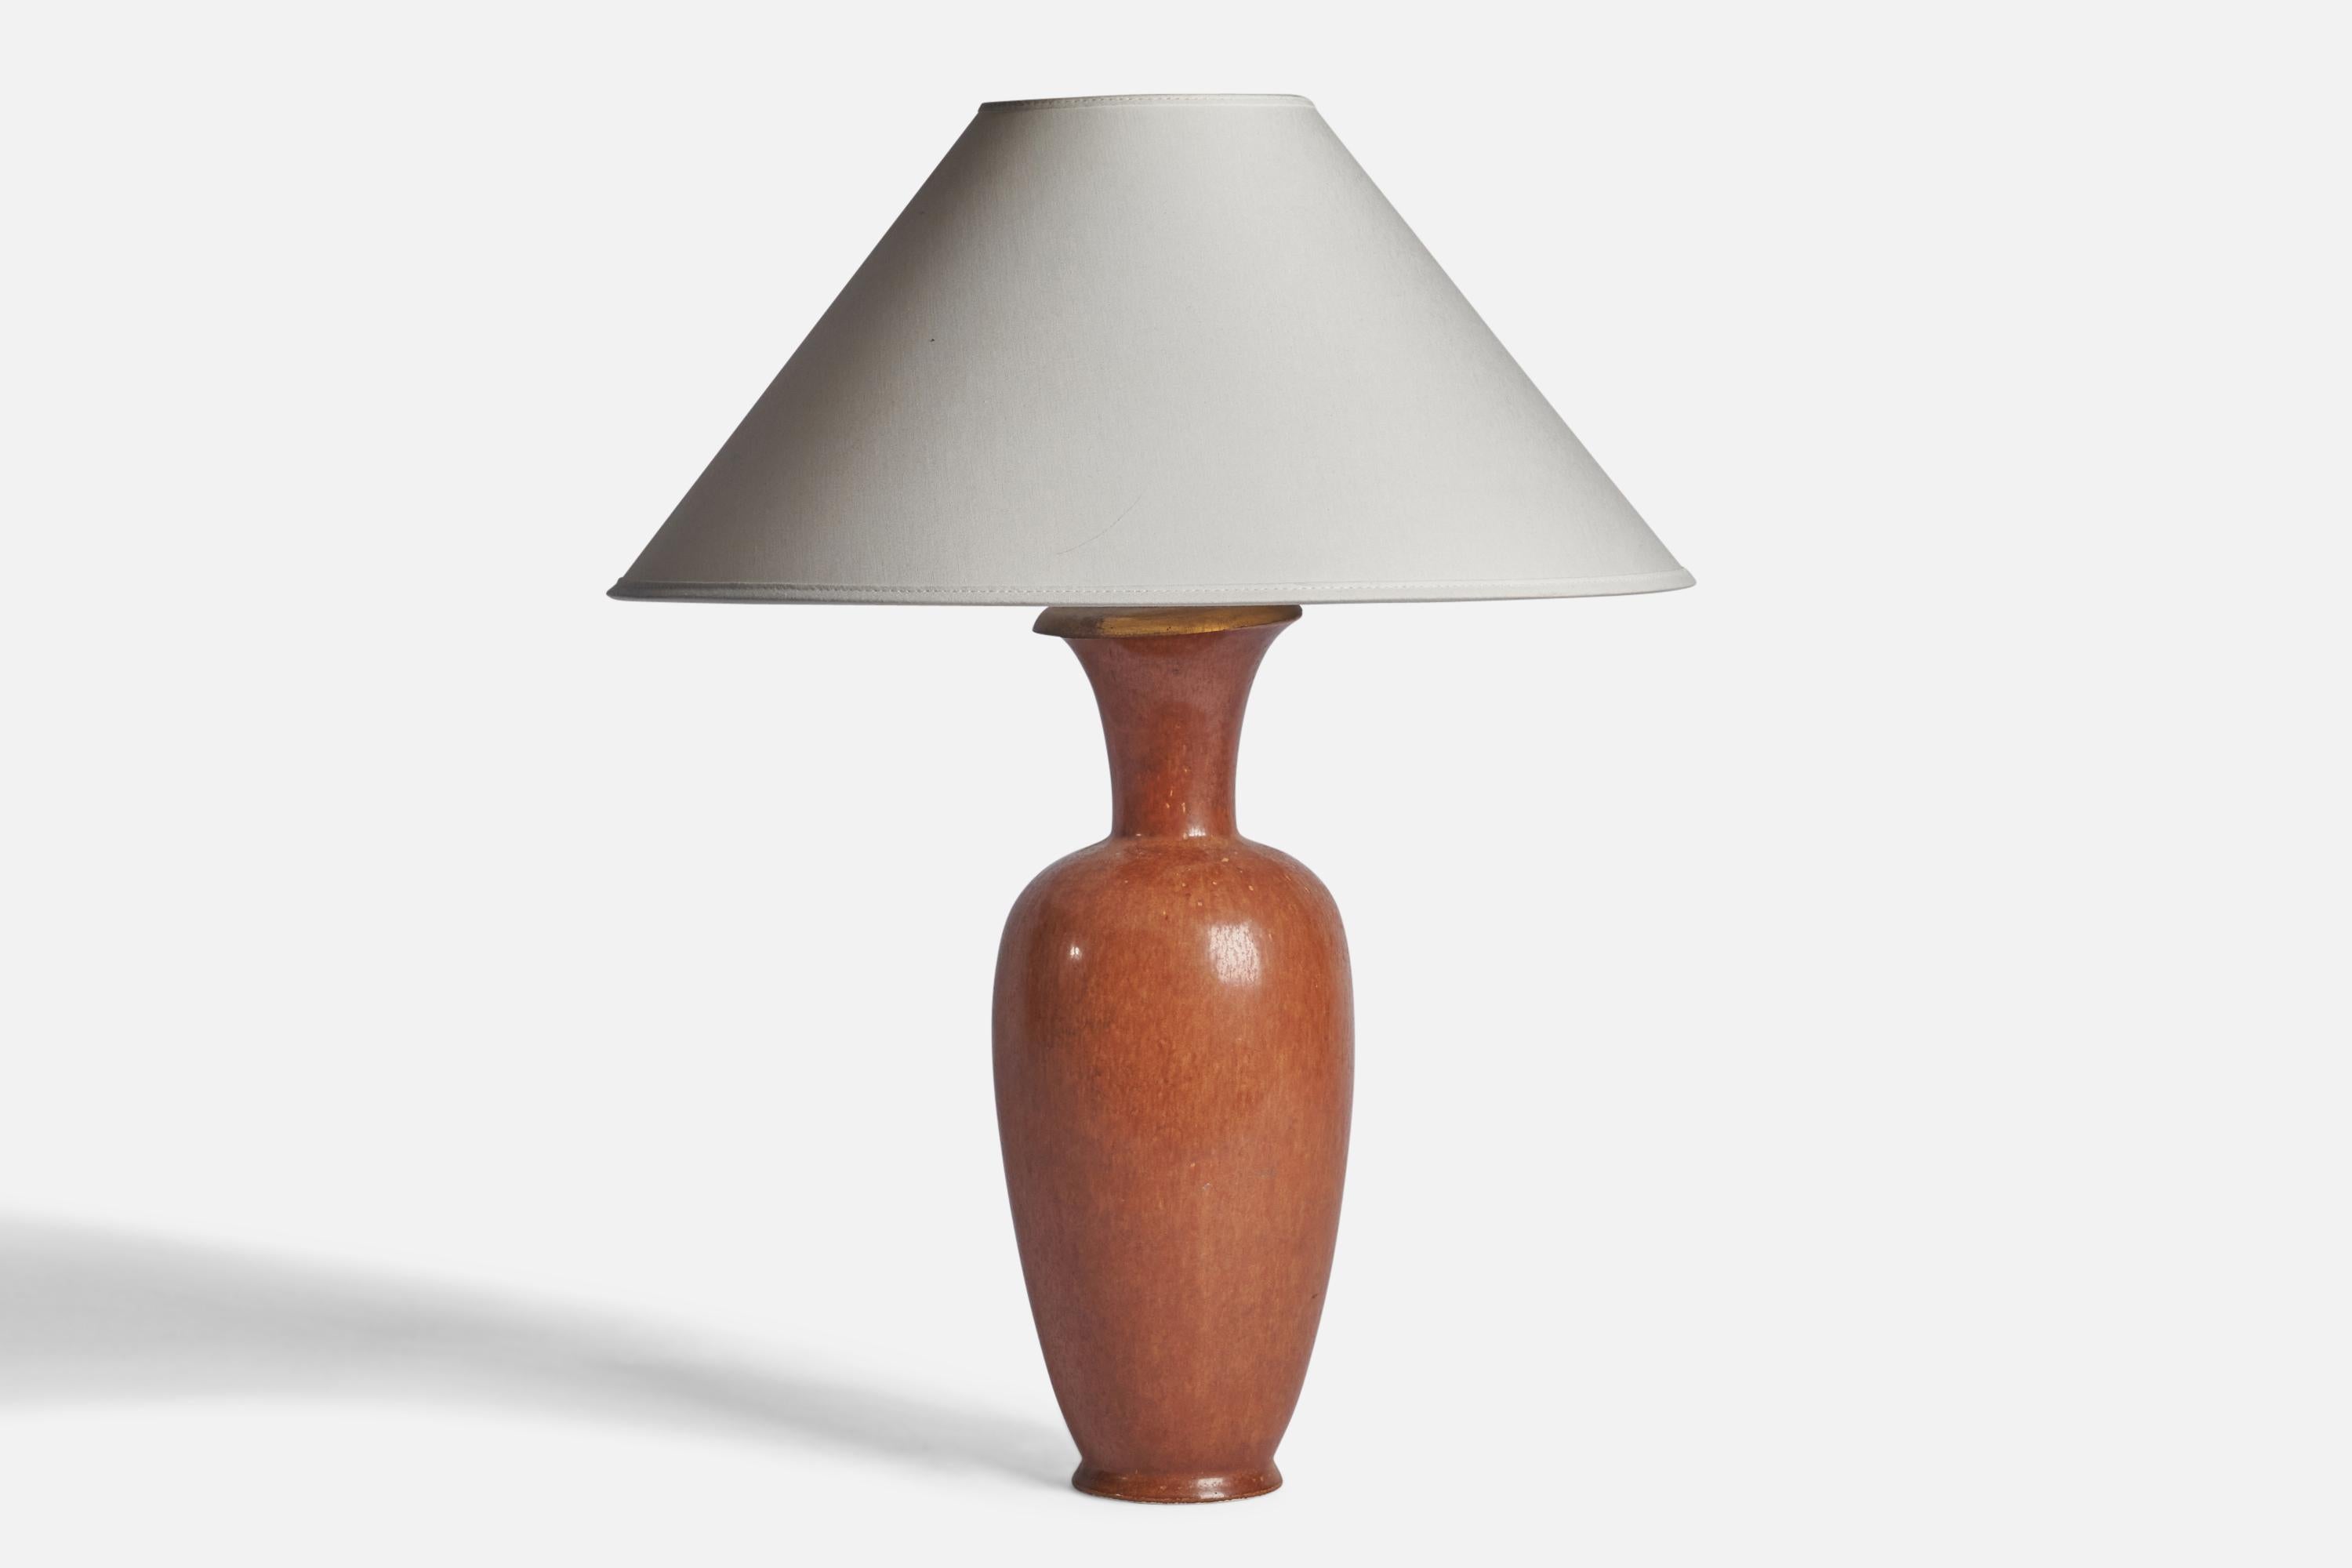 A brown-glazed stoneware and brass table lamp designed by Gunnar Nylund and produced by Rörstrand, Sweden, 1940s.

Dimensions of Lamp (inches): 15.75” H x 5” Diameter
Dimensions of Shade (inches): 4.5” Top Diameter x 16” Bottom Diameter x 7.25”